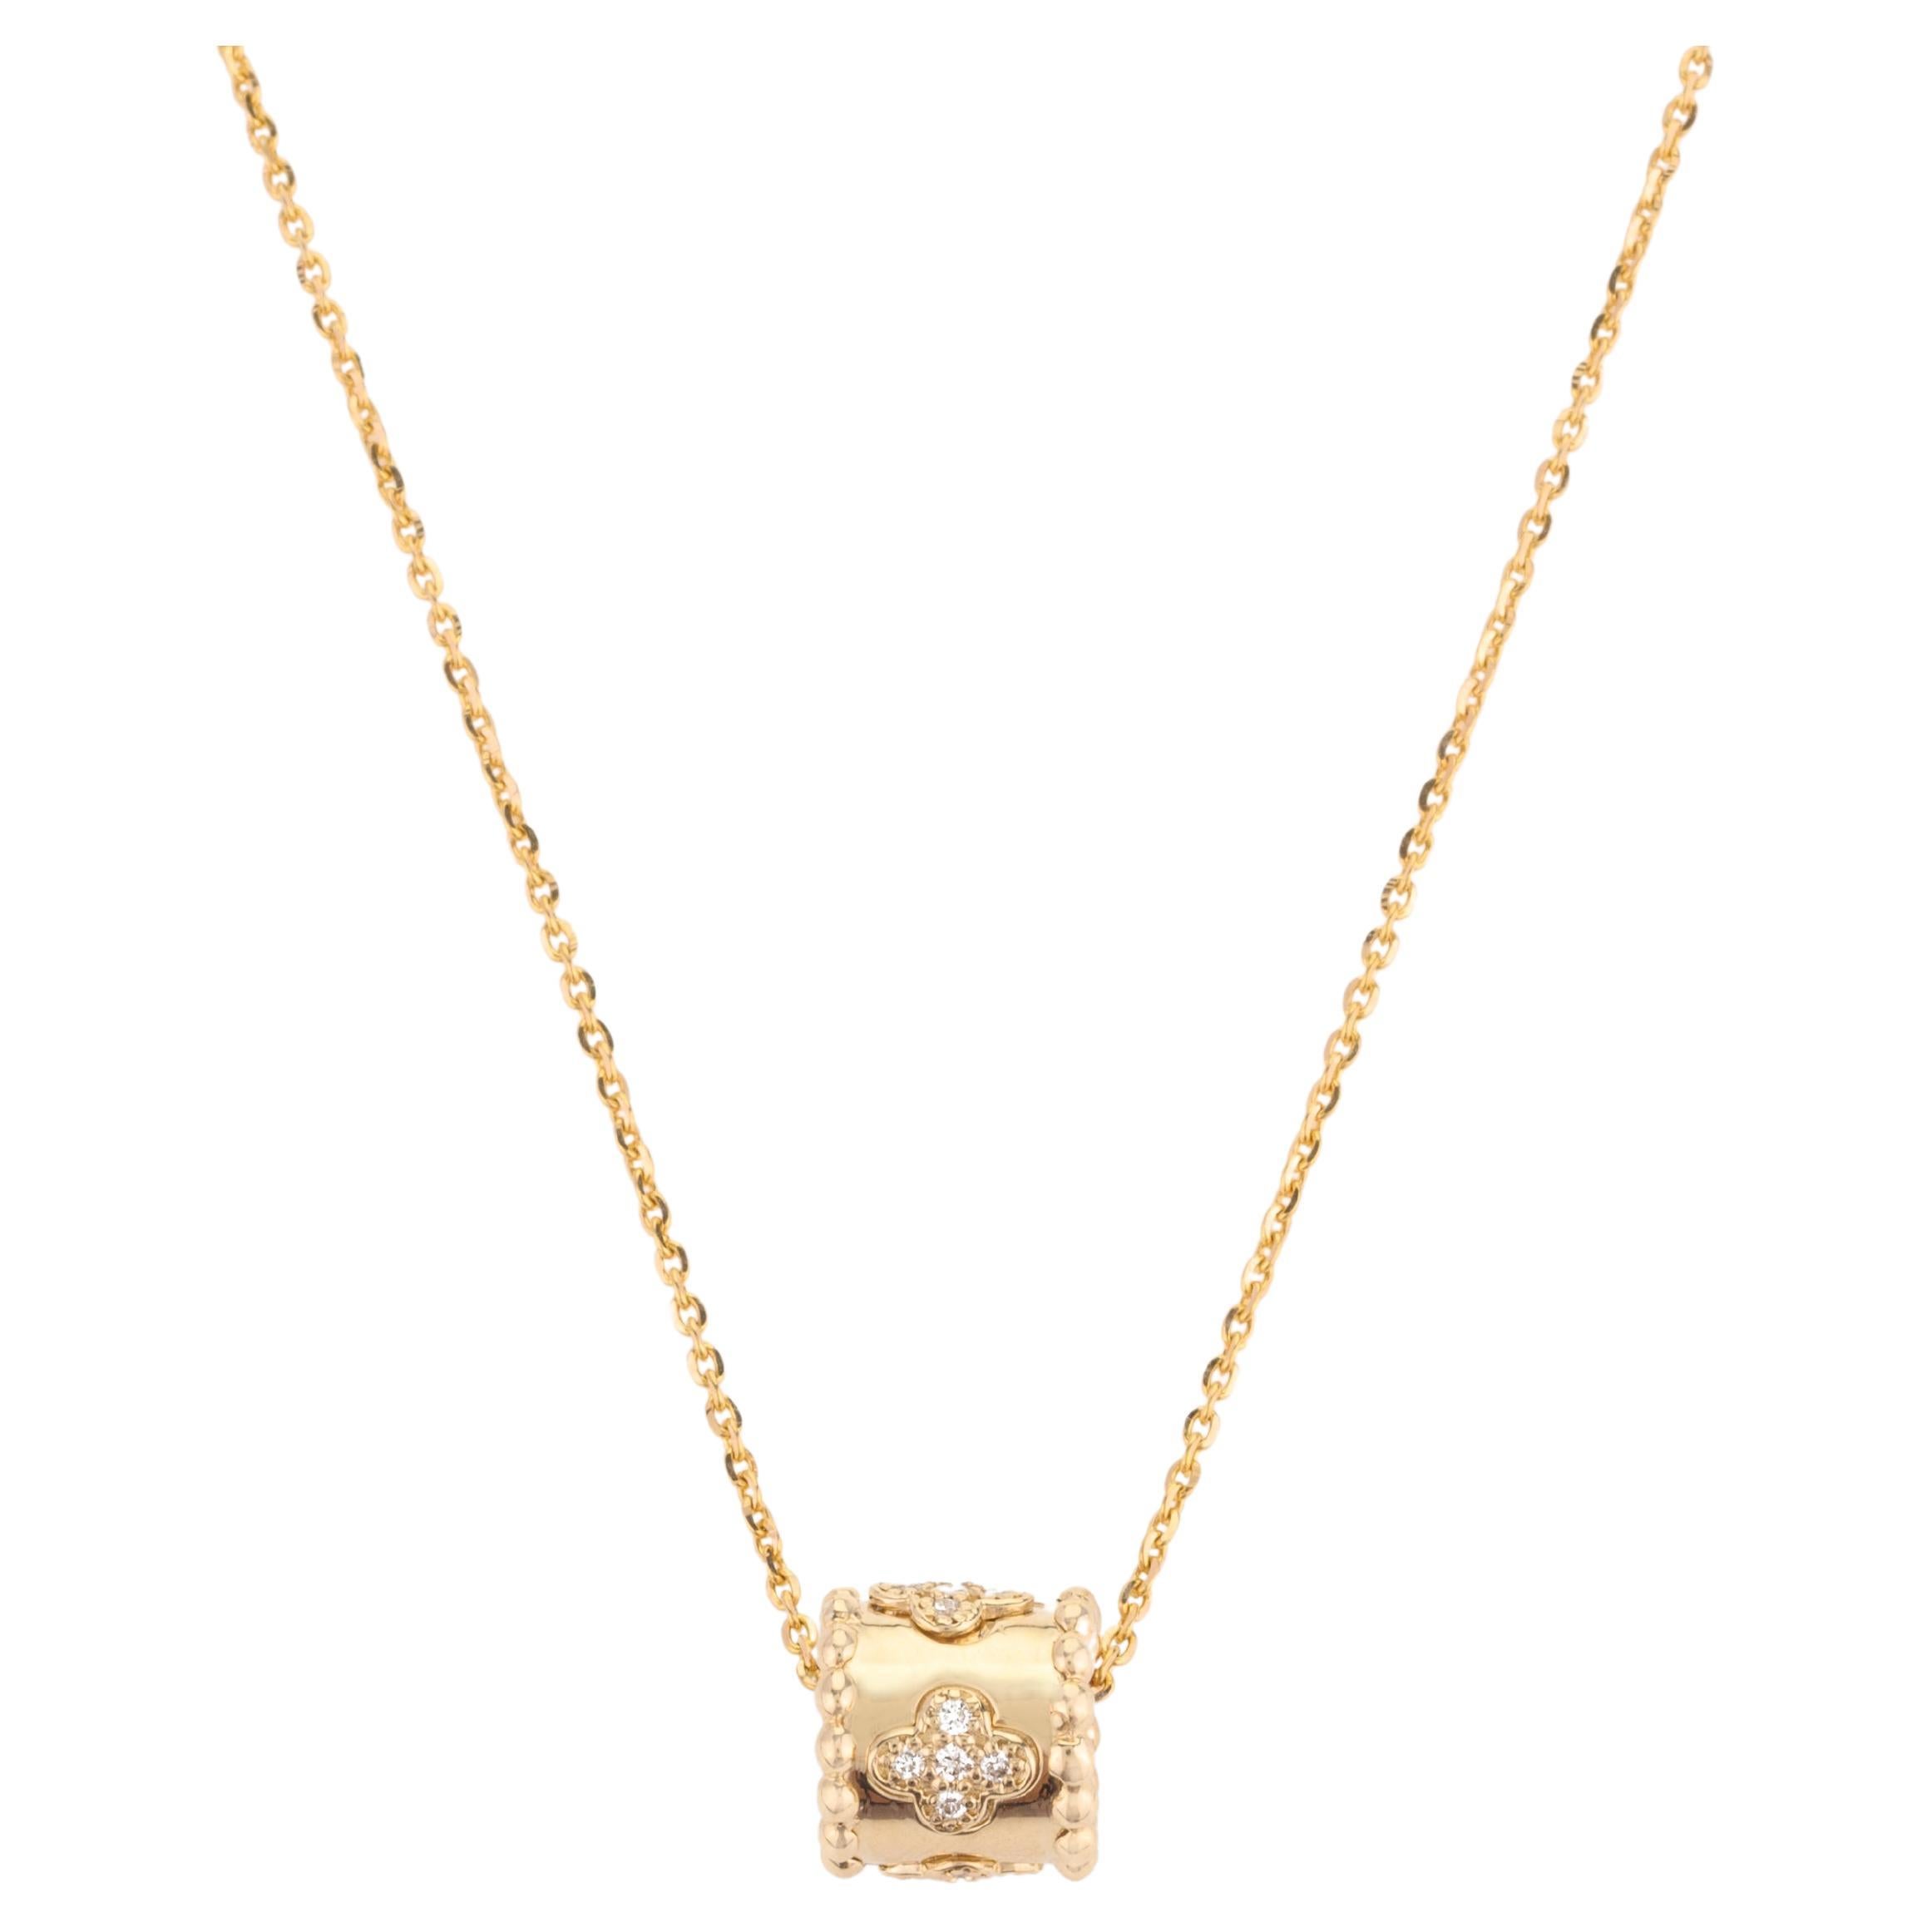 Diamond Clover Roller Pendant Chain Necklace for Her in 14k Solid Yellow Gold